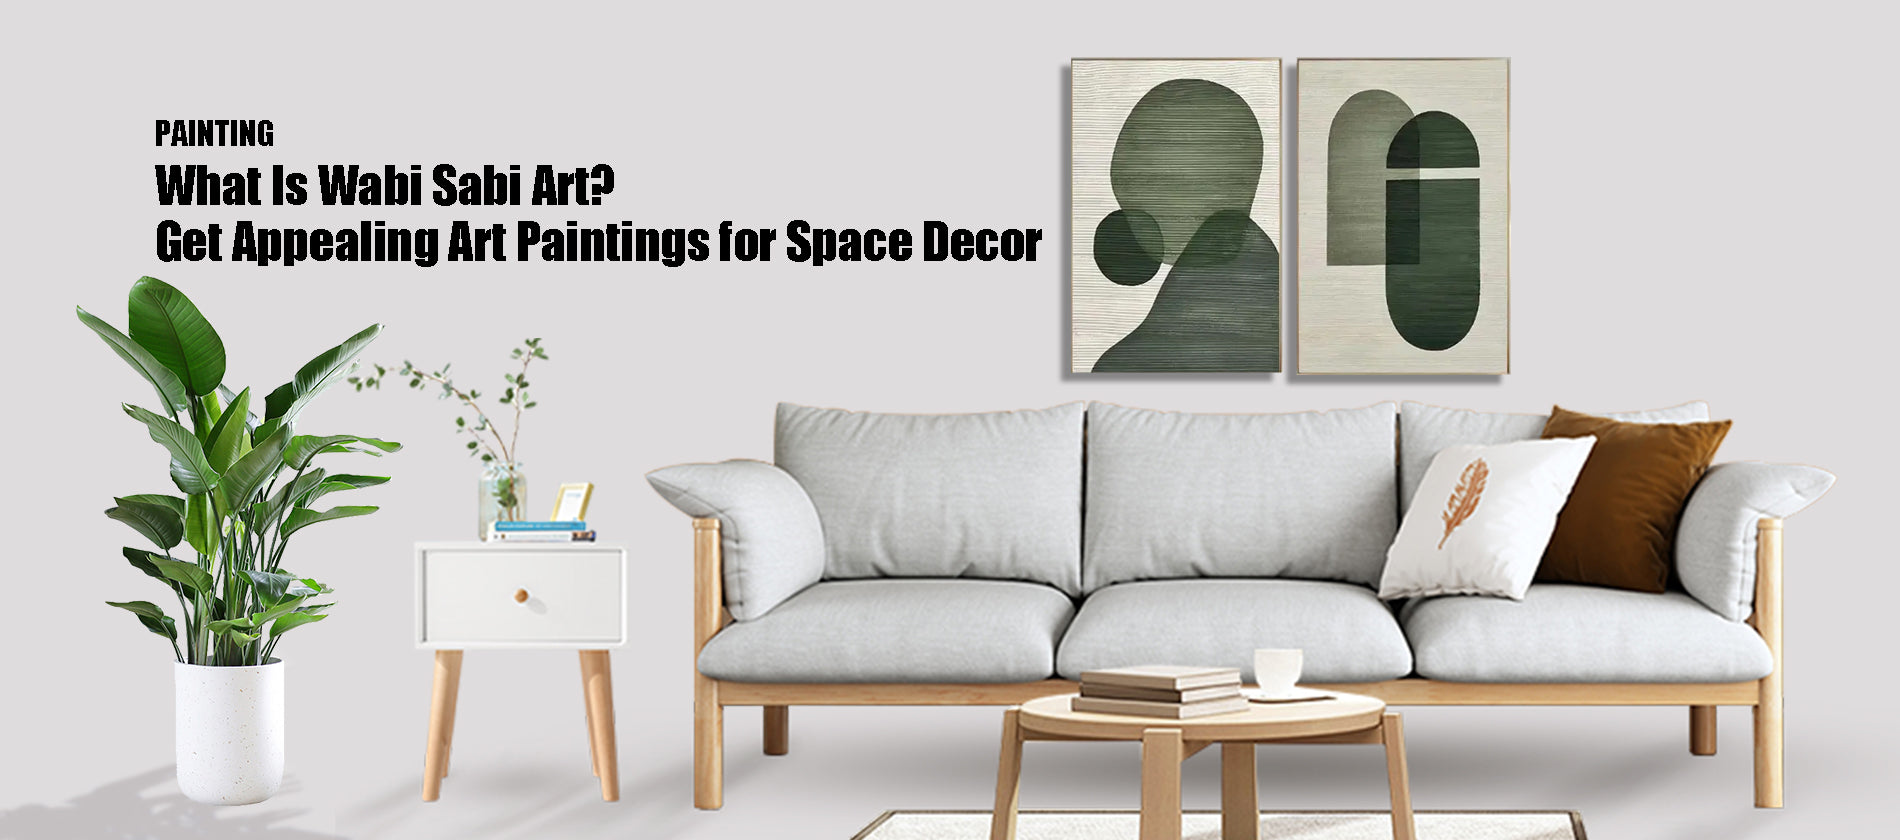 What Is Wabi Sabi Art? Get Appealing Art Paintings for Space Decor